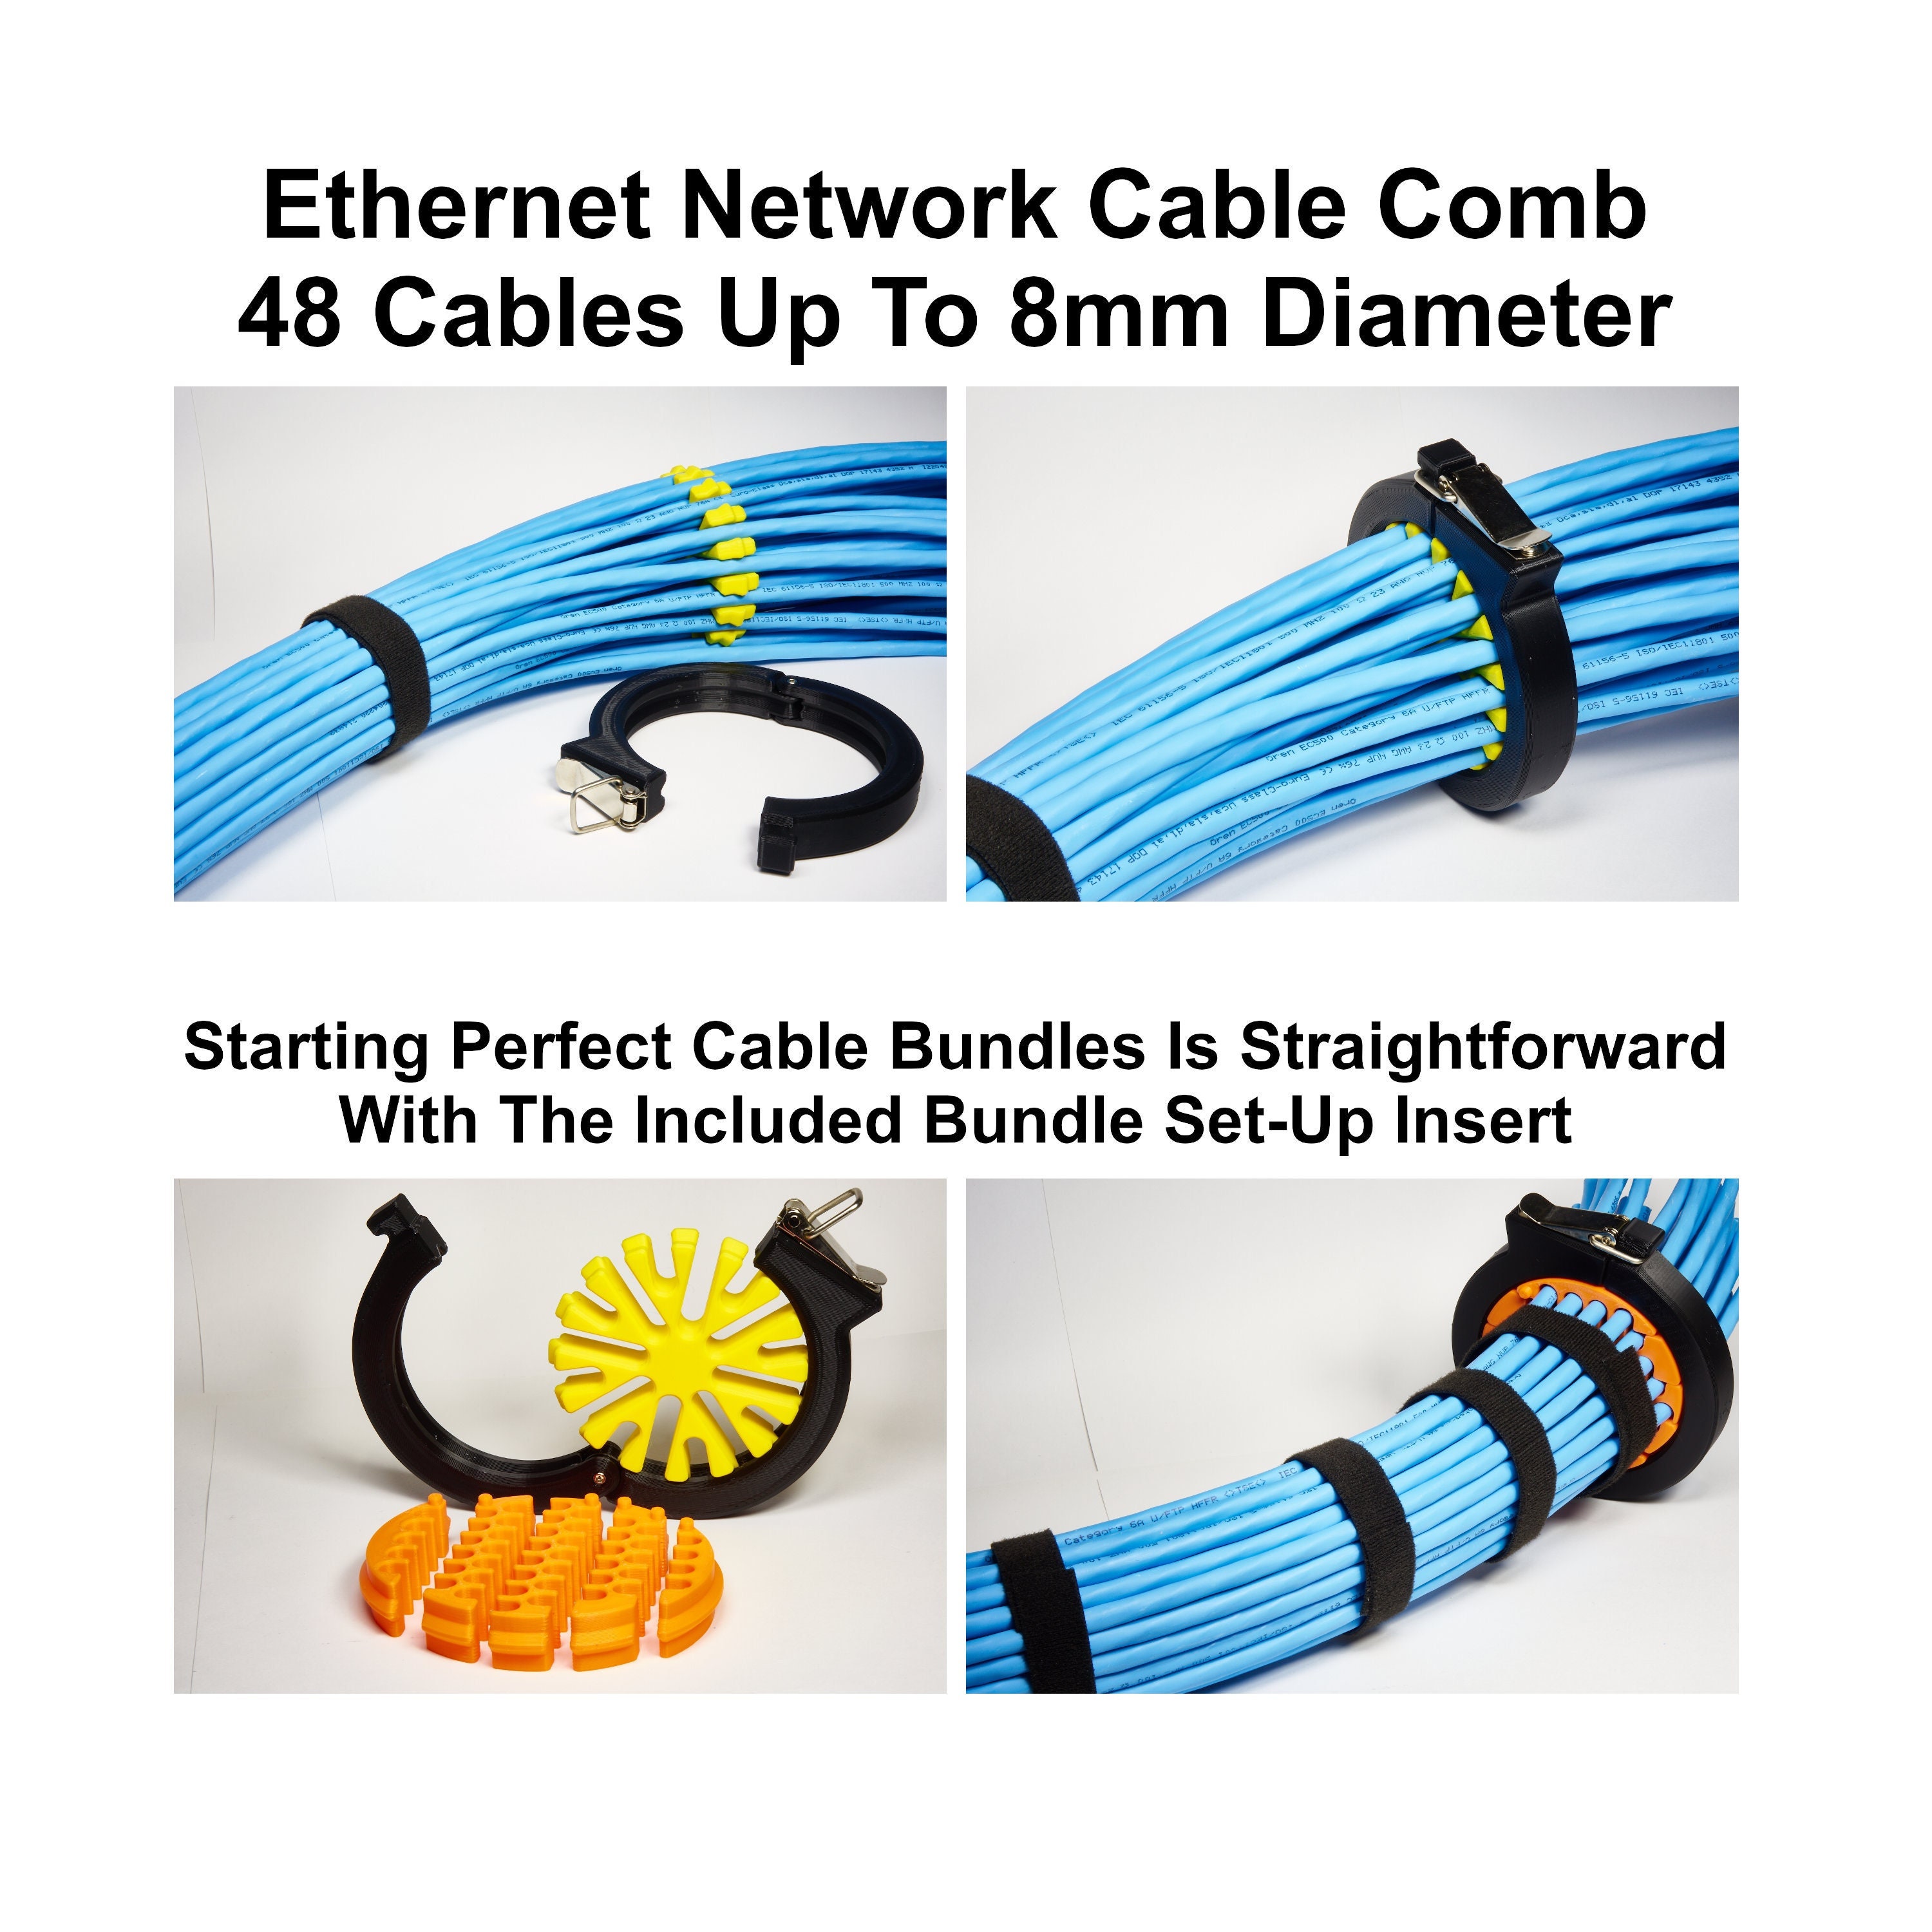 Ethernet Network Cable Comb / Cable Dresser 48 Cables Capacity up